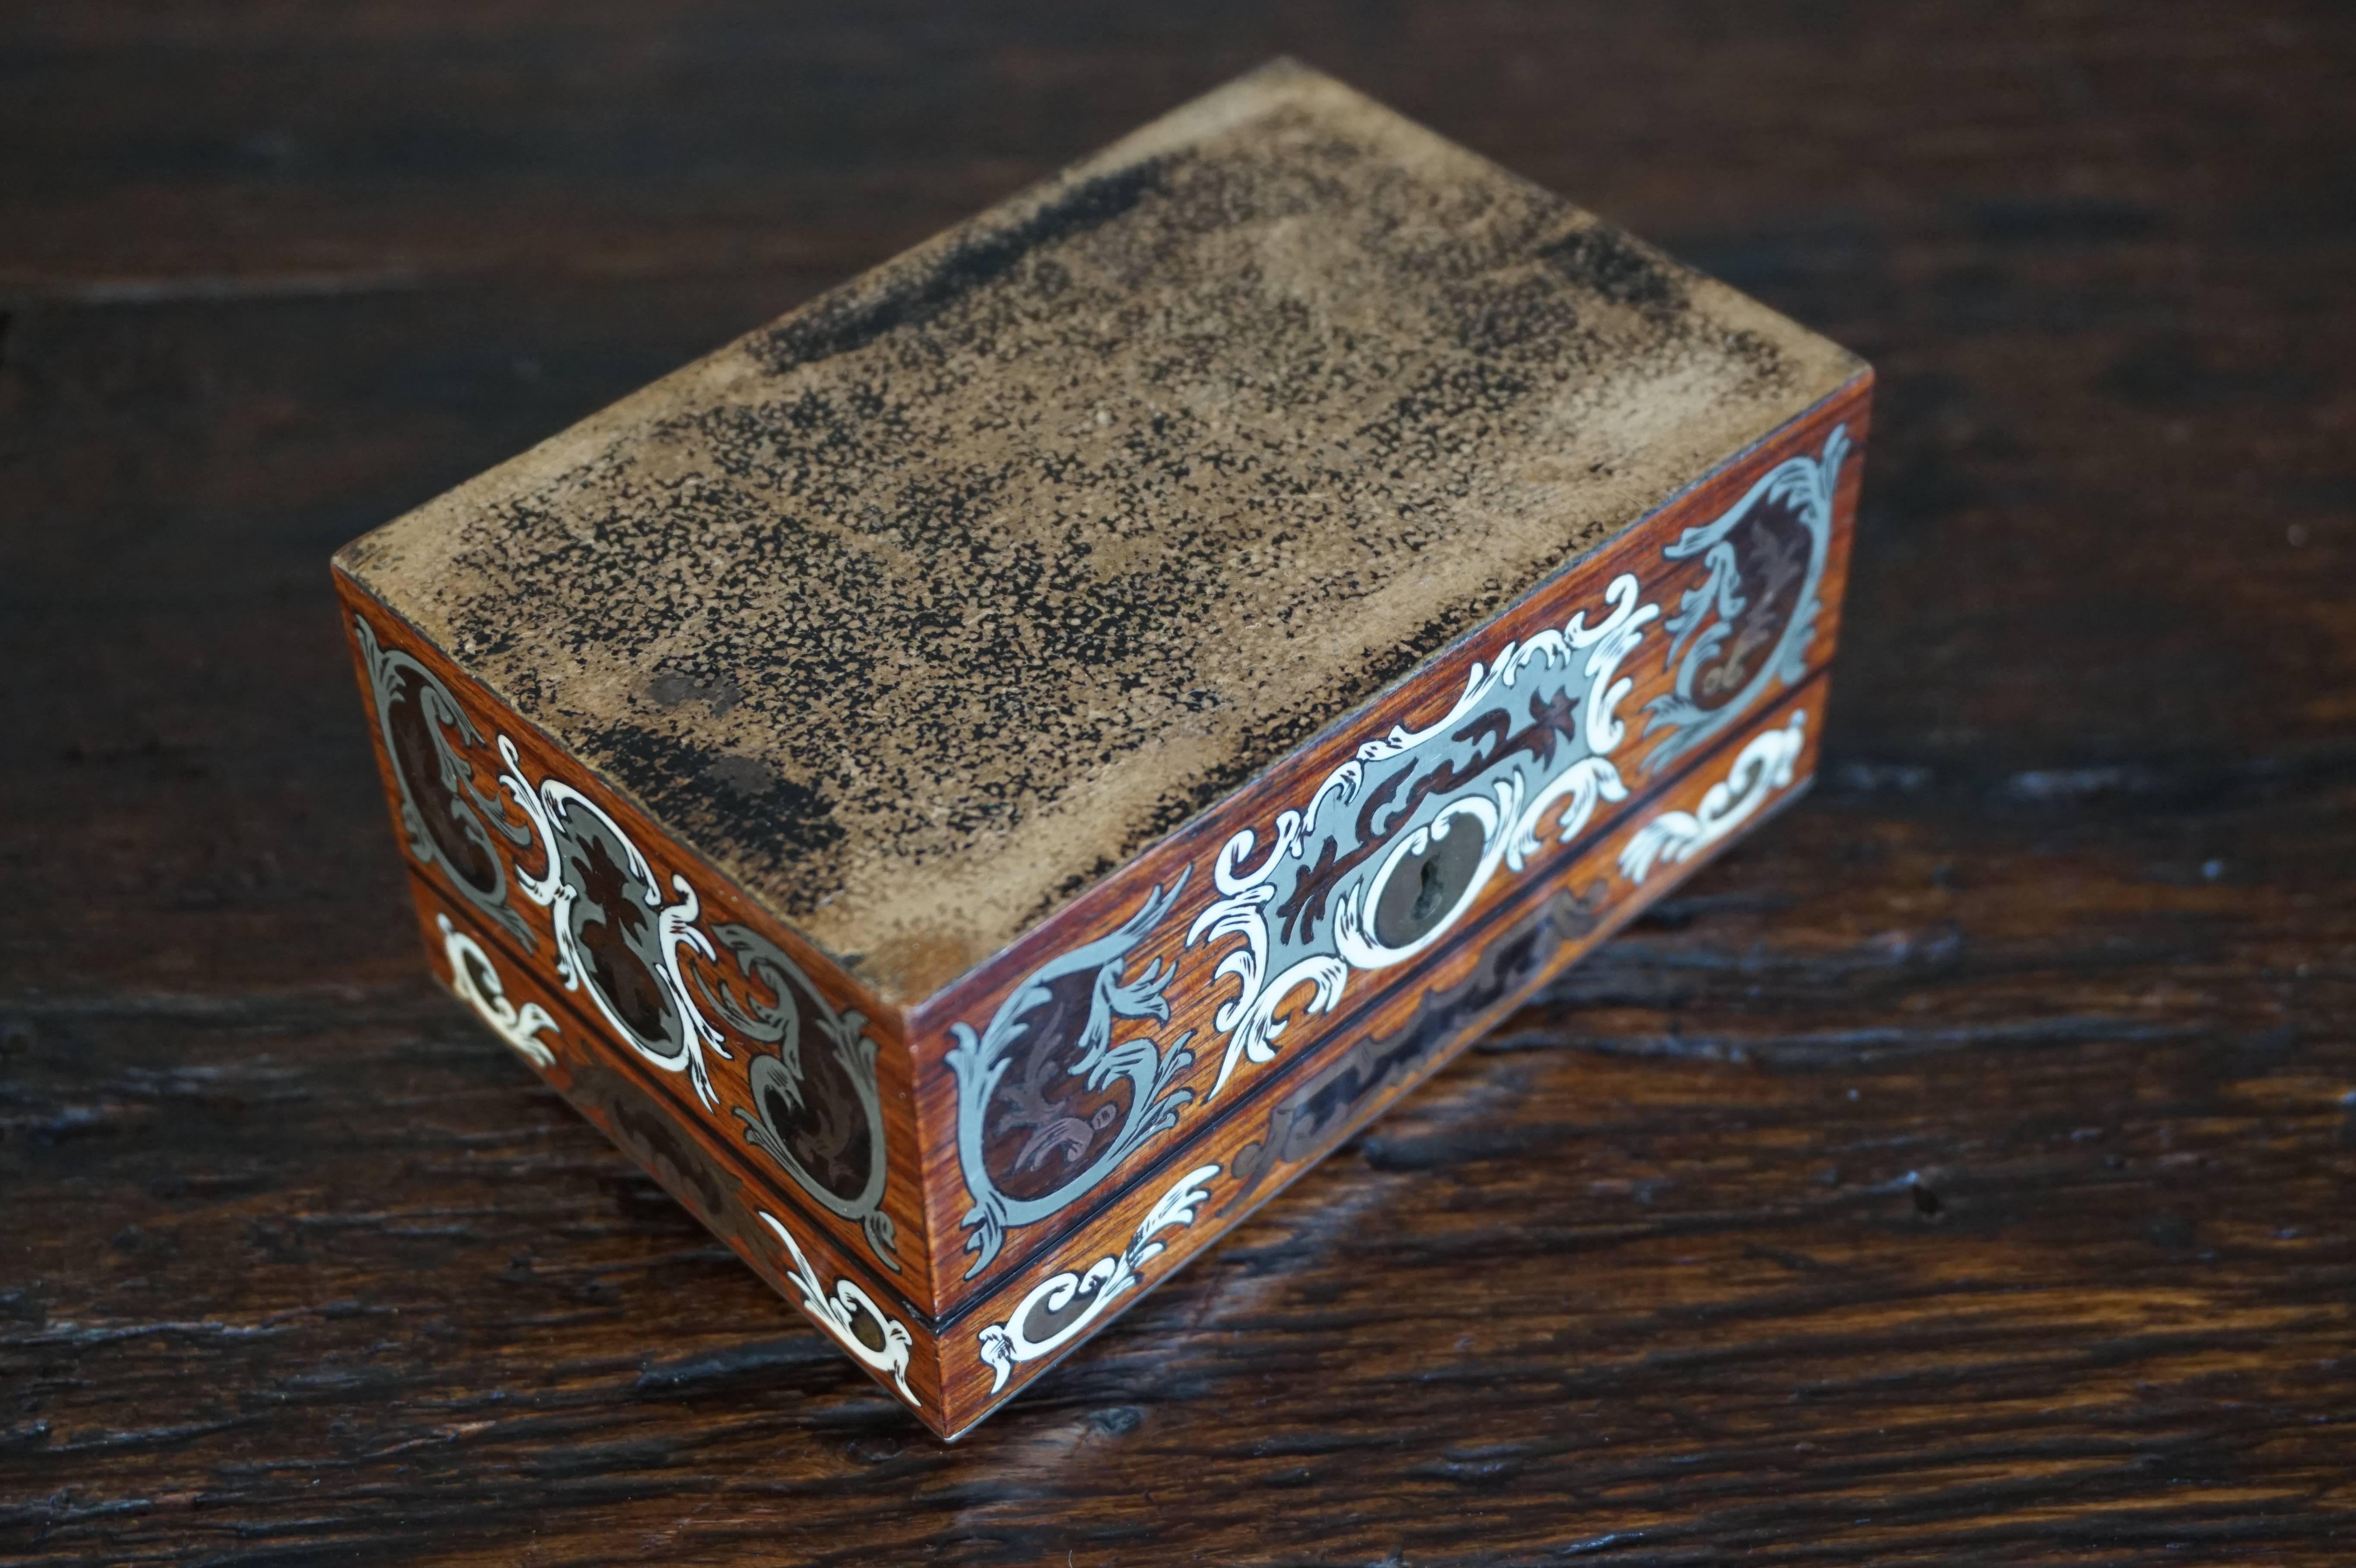 20th Century Stunning Antique Box Inlaid with Amazing Motifs in Silver, Bone, Mother-of-Pearl